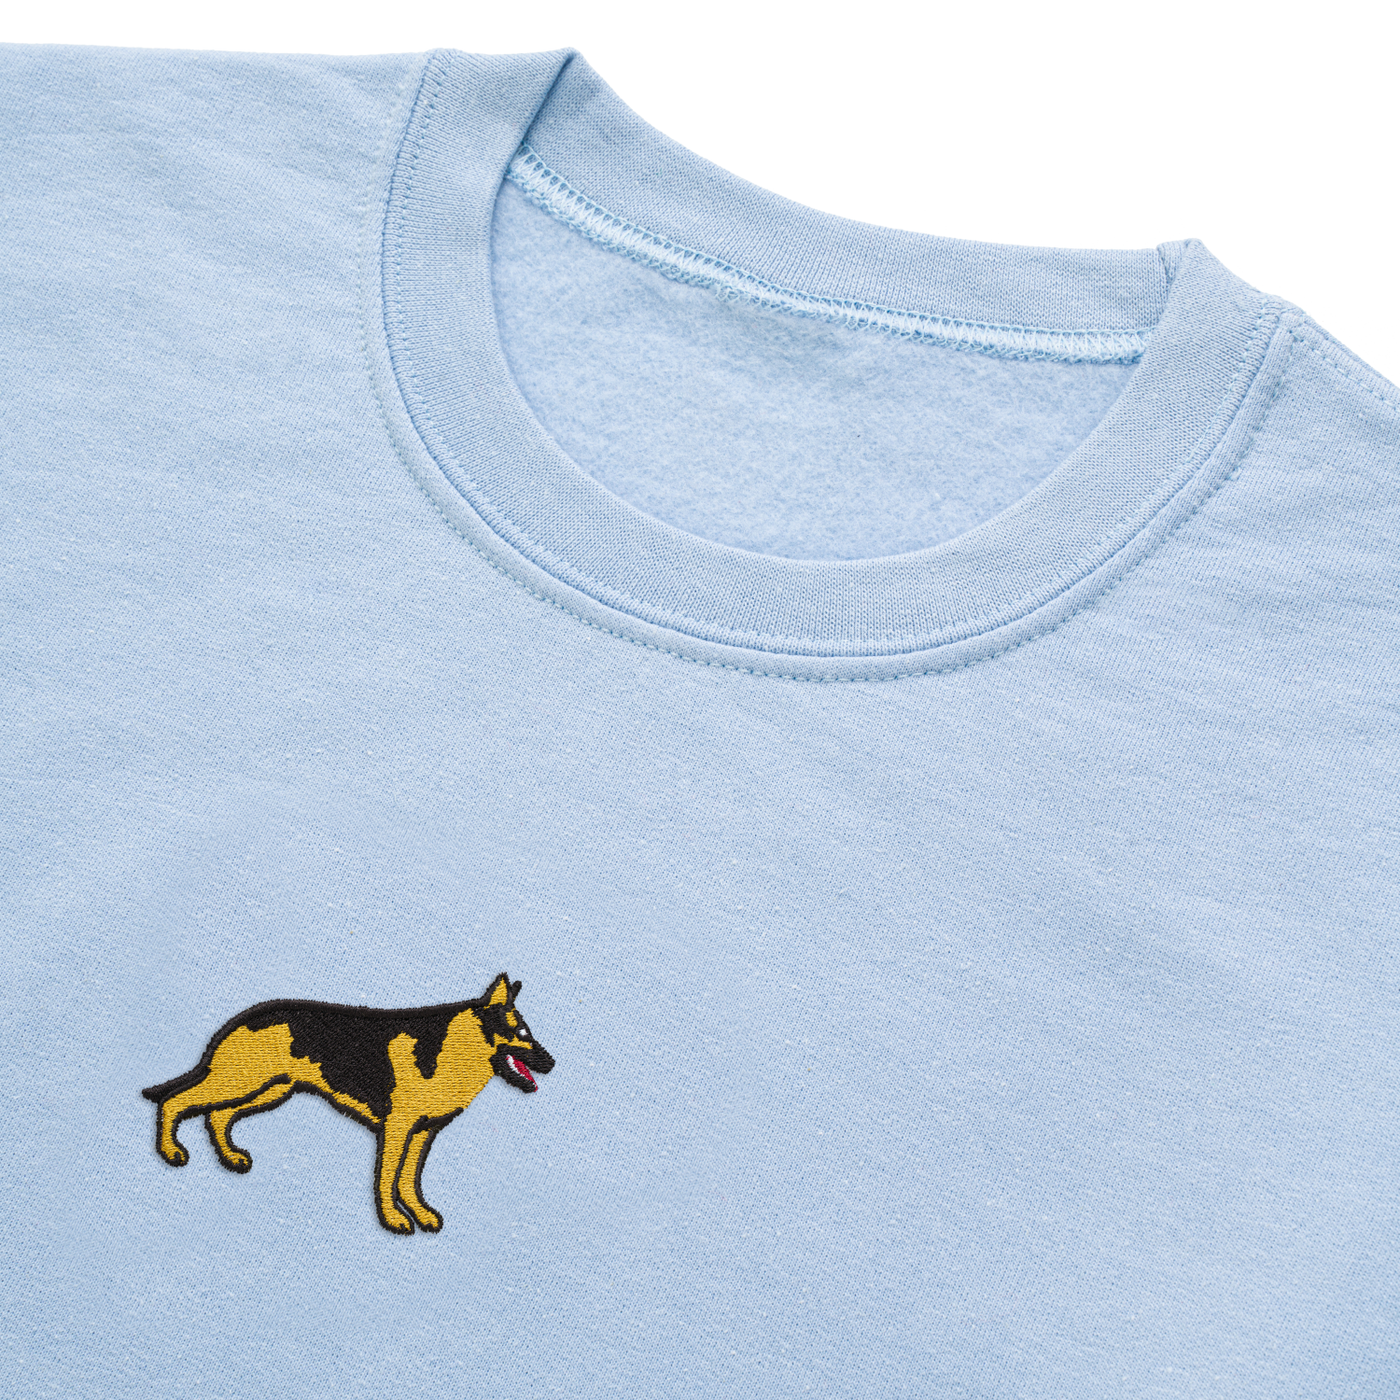 Bobby's Planet Women's Embroidered German Shepherd Sweatshirt from Paws Dog Cat Animals Collection in Light Blue Color#color_light-blue